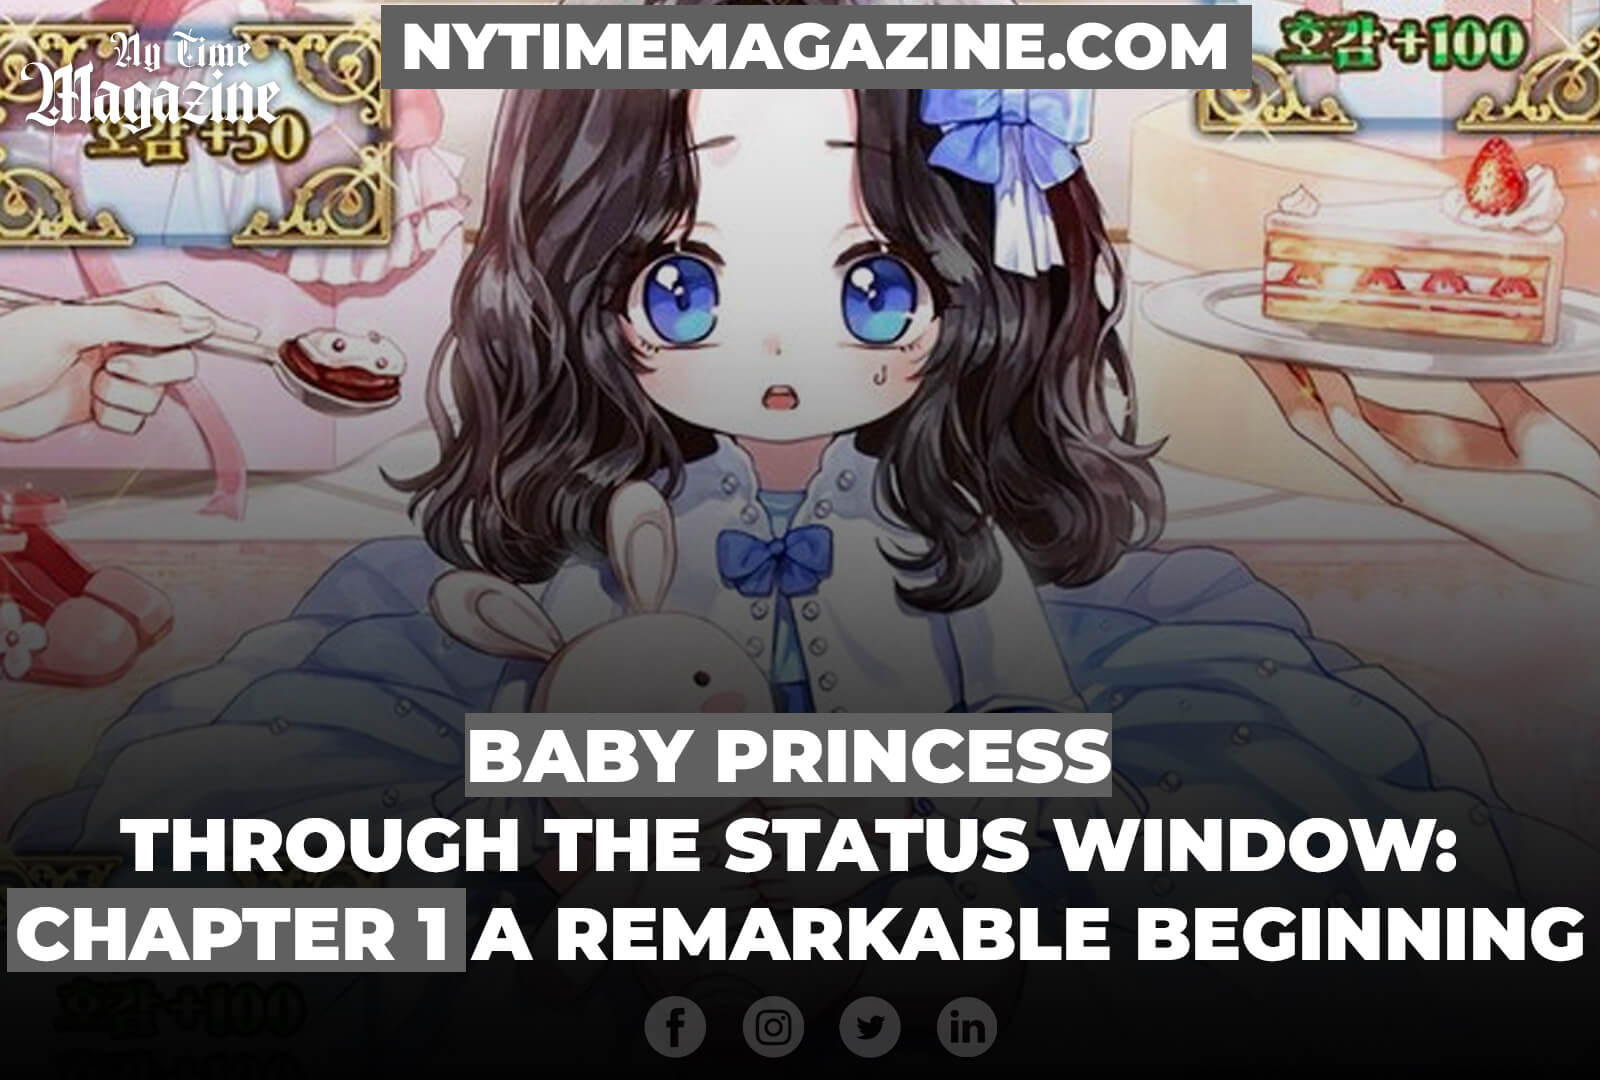 BABY PRINCESS THROUGH THE STATUS WINDOW: CHAPTER 1 - A REMARKABLE BEGINNING